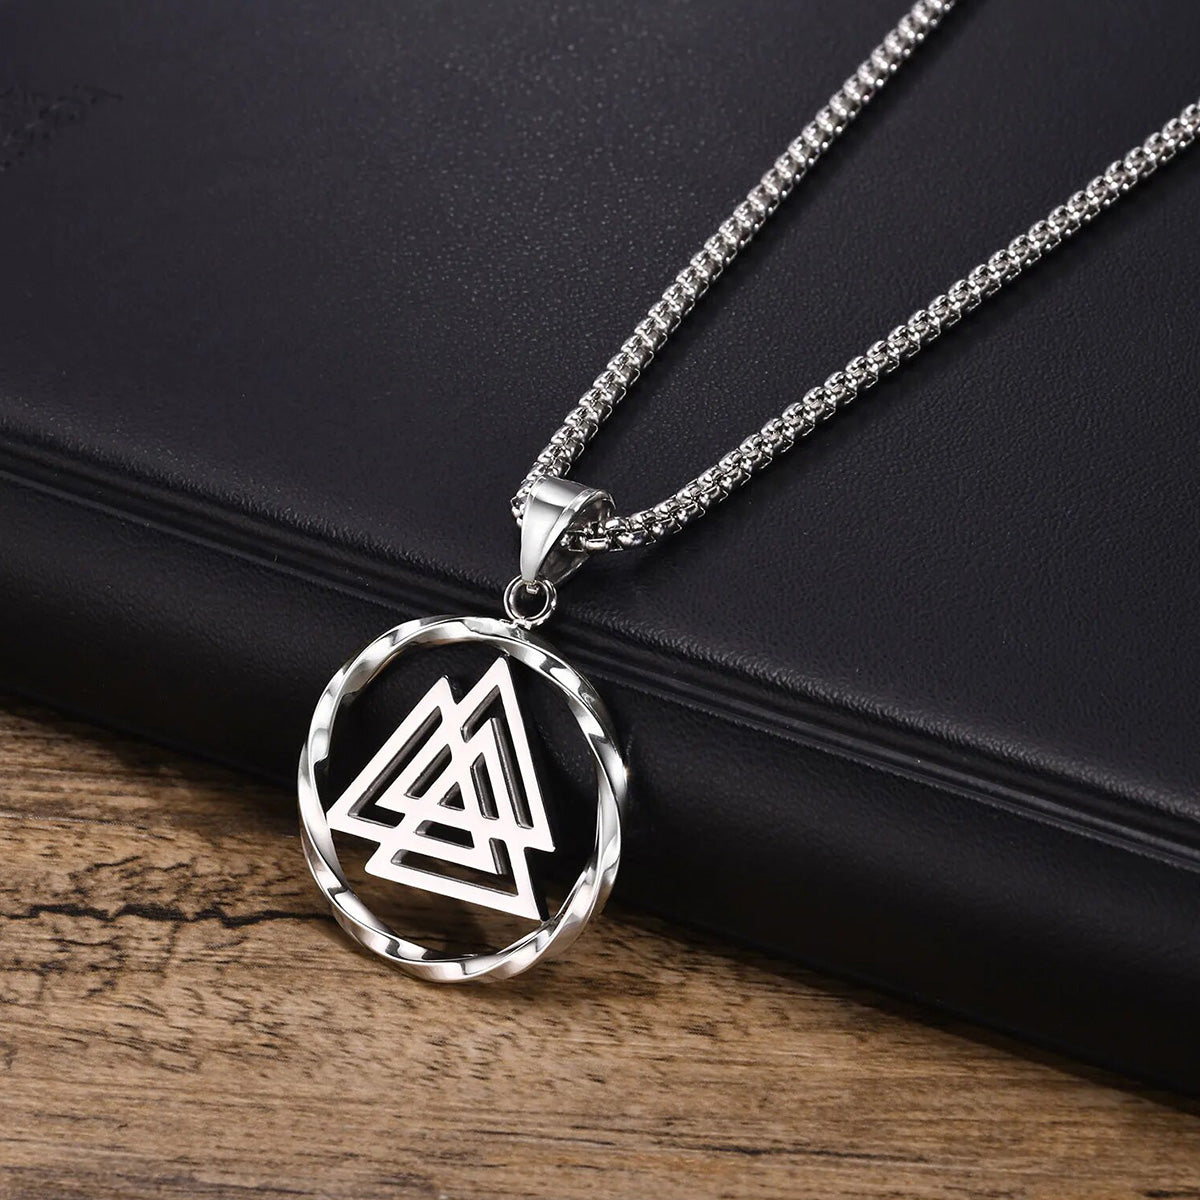 Viking - Norse Viking Necklaces for Men Women, Stainless Steel Round Hollow Knot Pendant Collar Jewelry